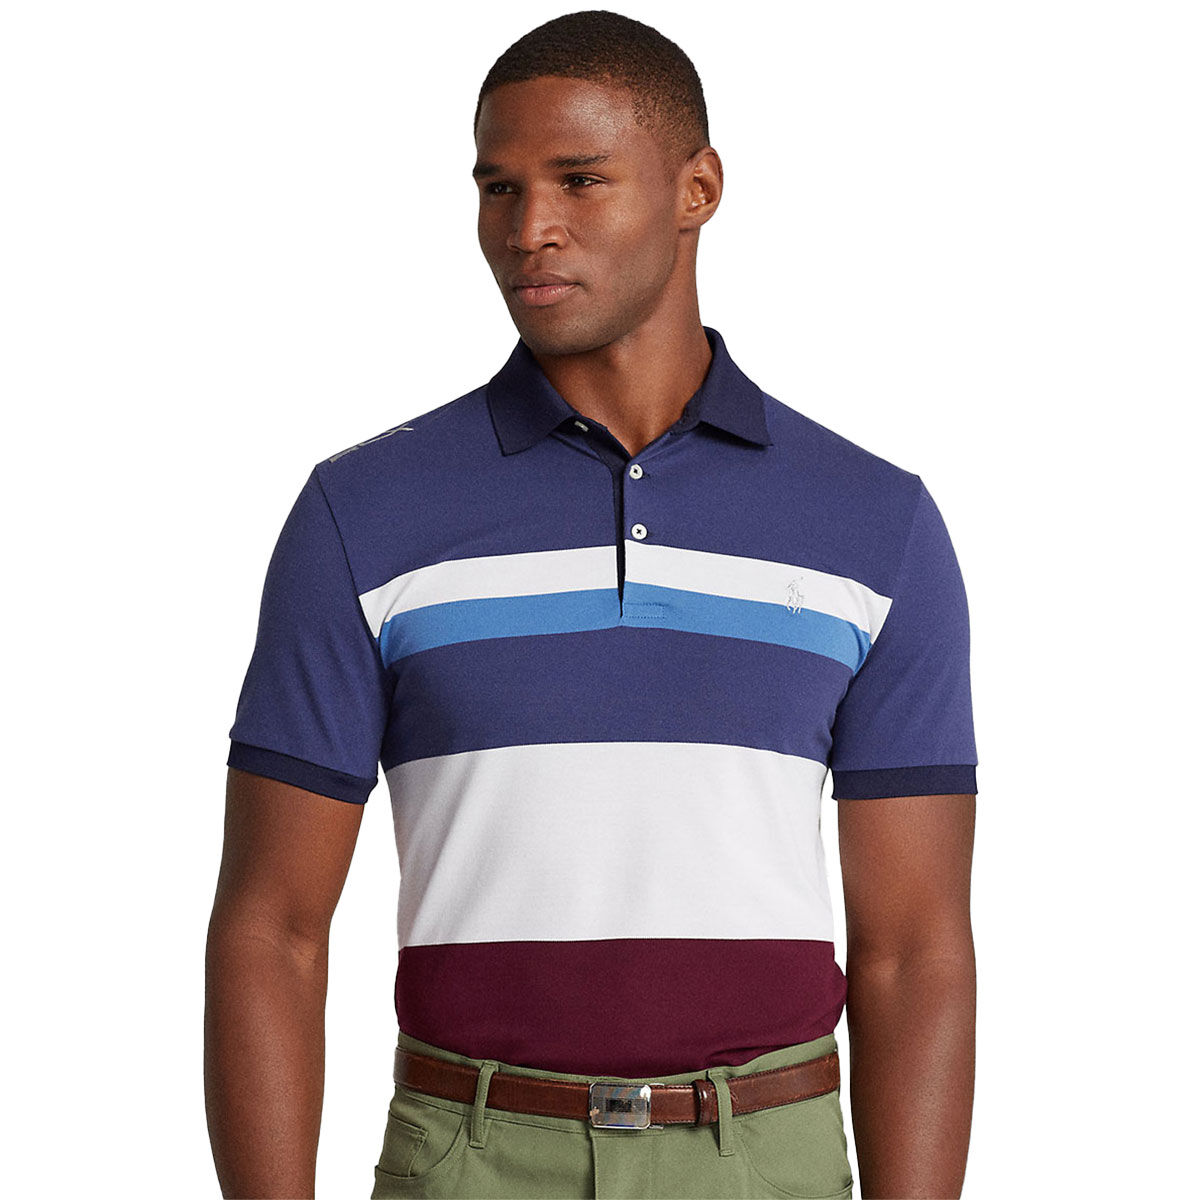 Ralph Lauren Blue, White and Red Embroidered Custom Slim Fit Performance Golf Polo Shirt, Size: Large | American Golf